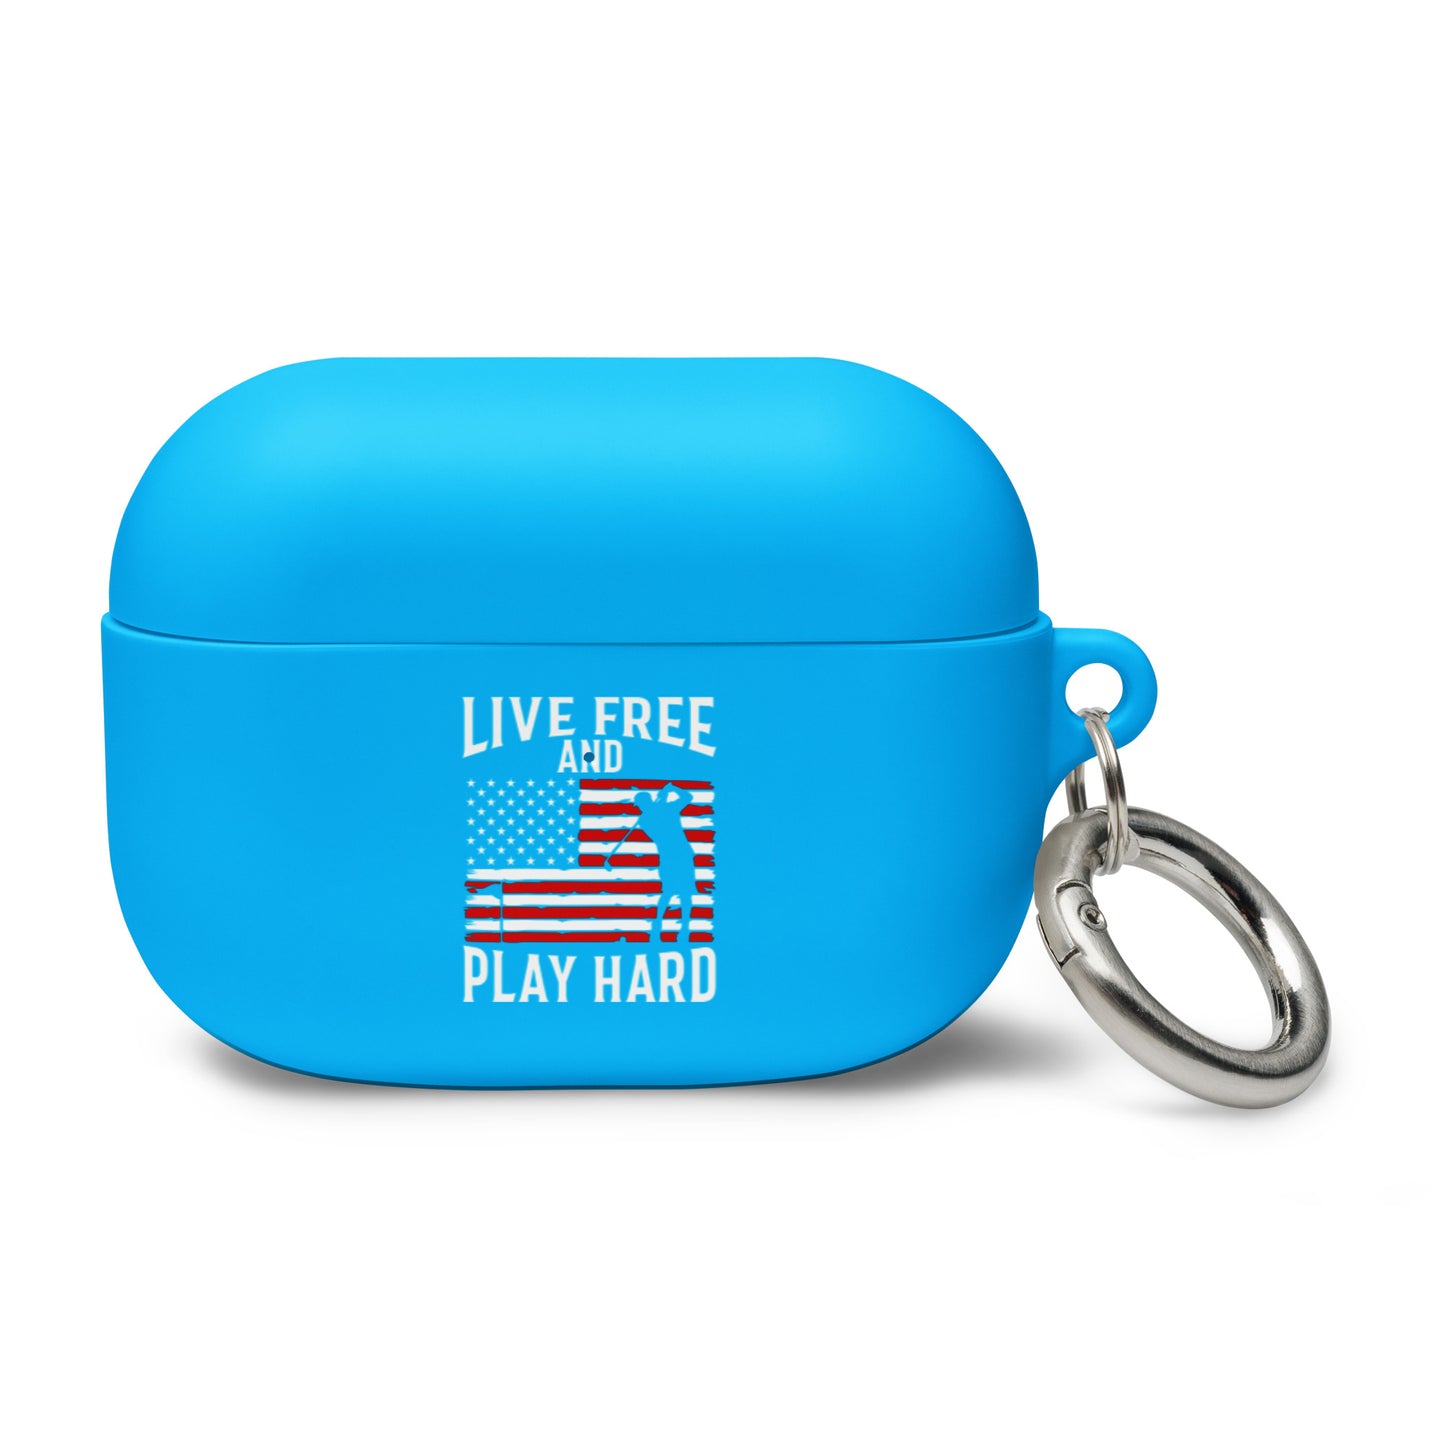 Live Free and Play Hard AirPods Case